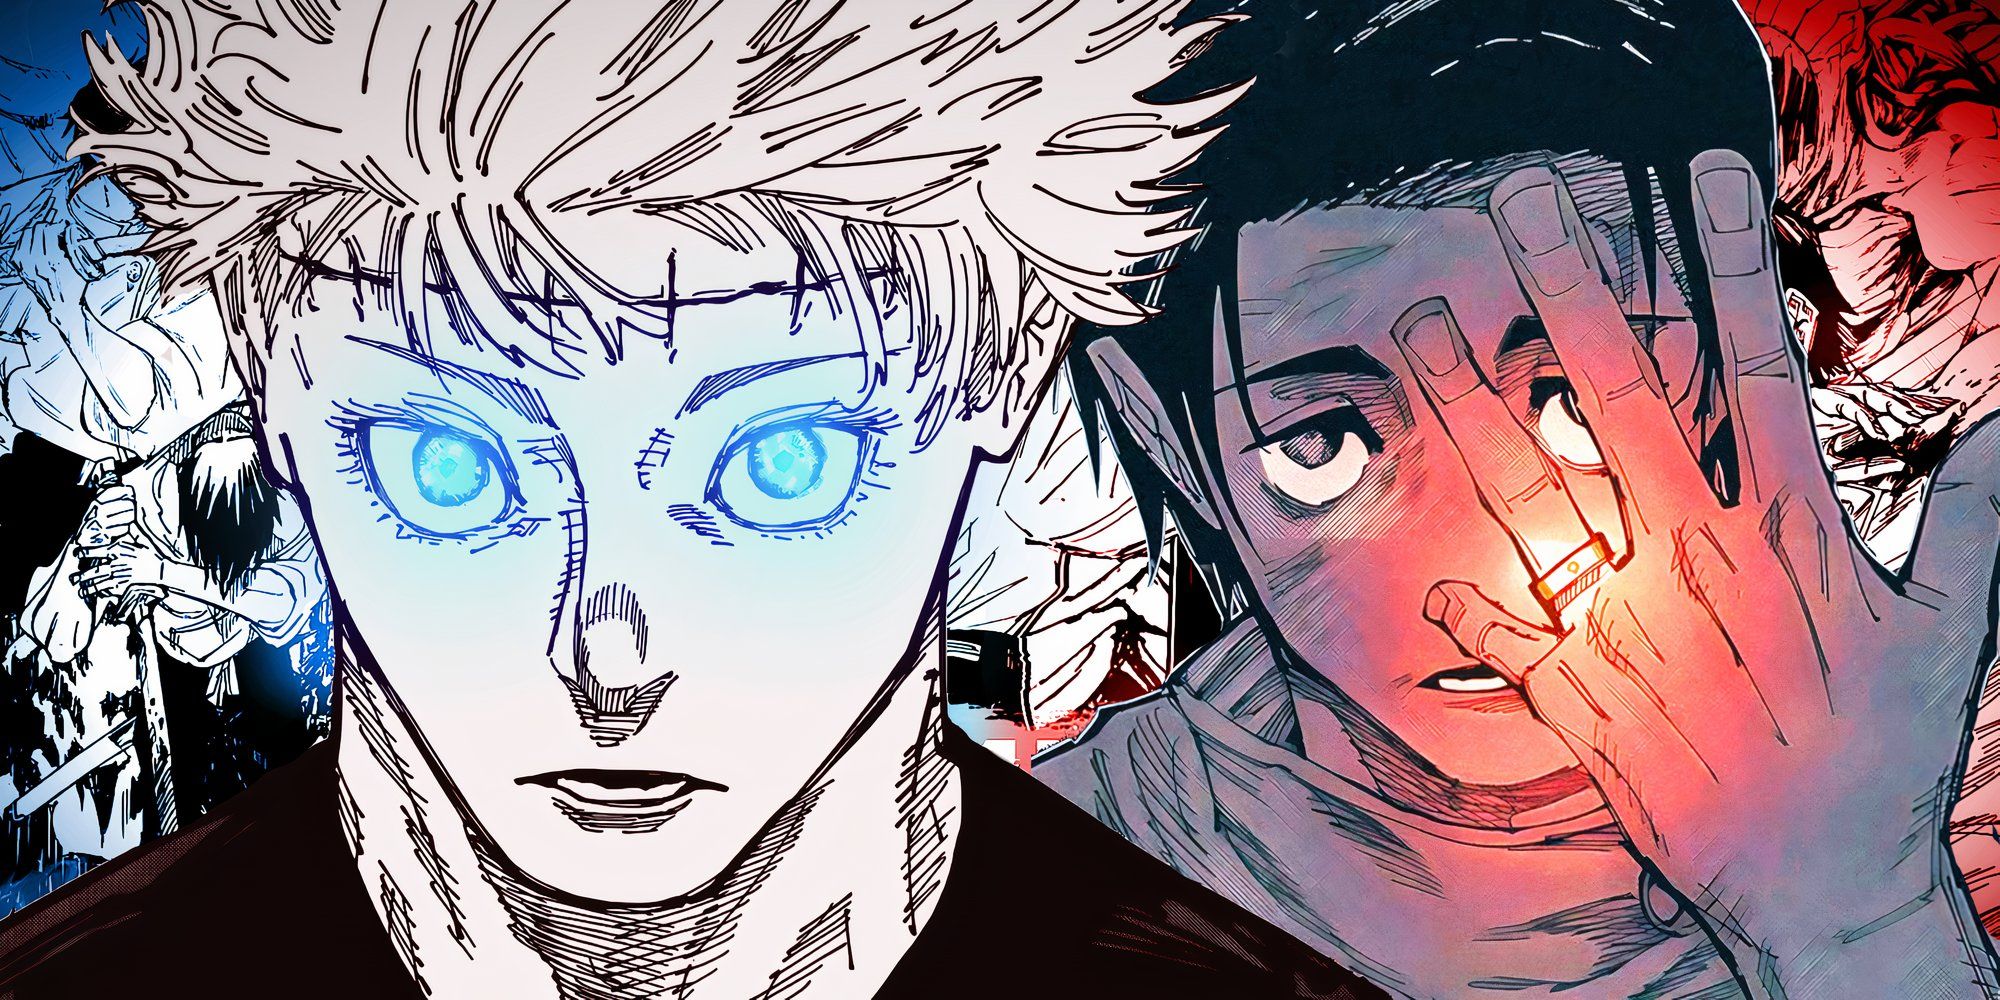 Jujutsu Kaisen’s “Strongest” Character Turned Out a Complete Disappointment